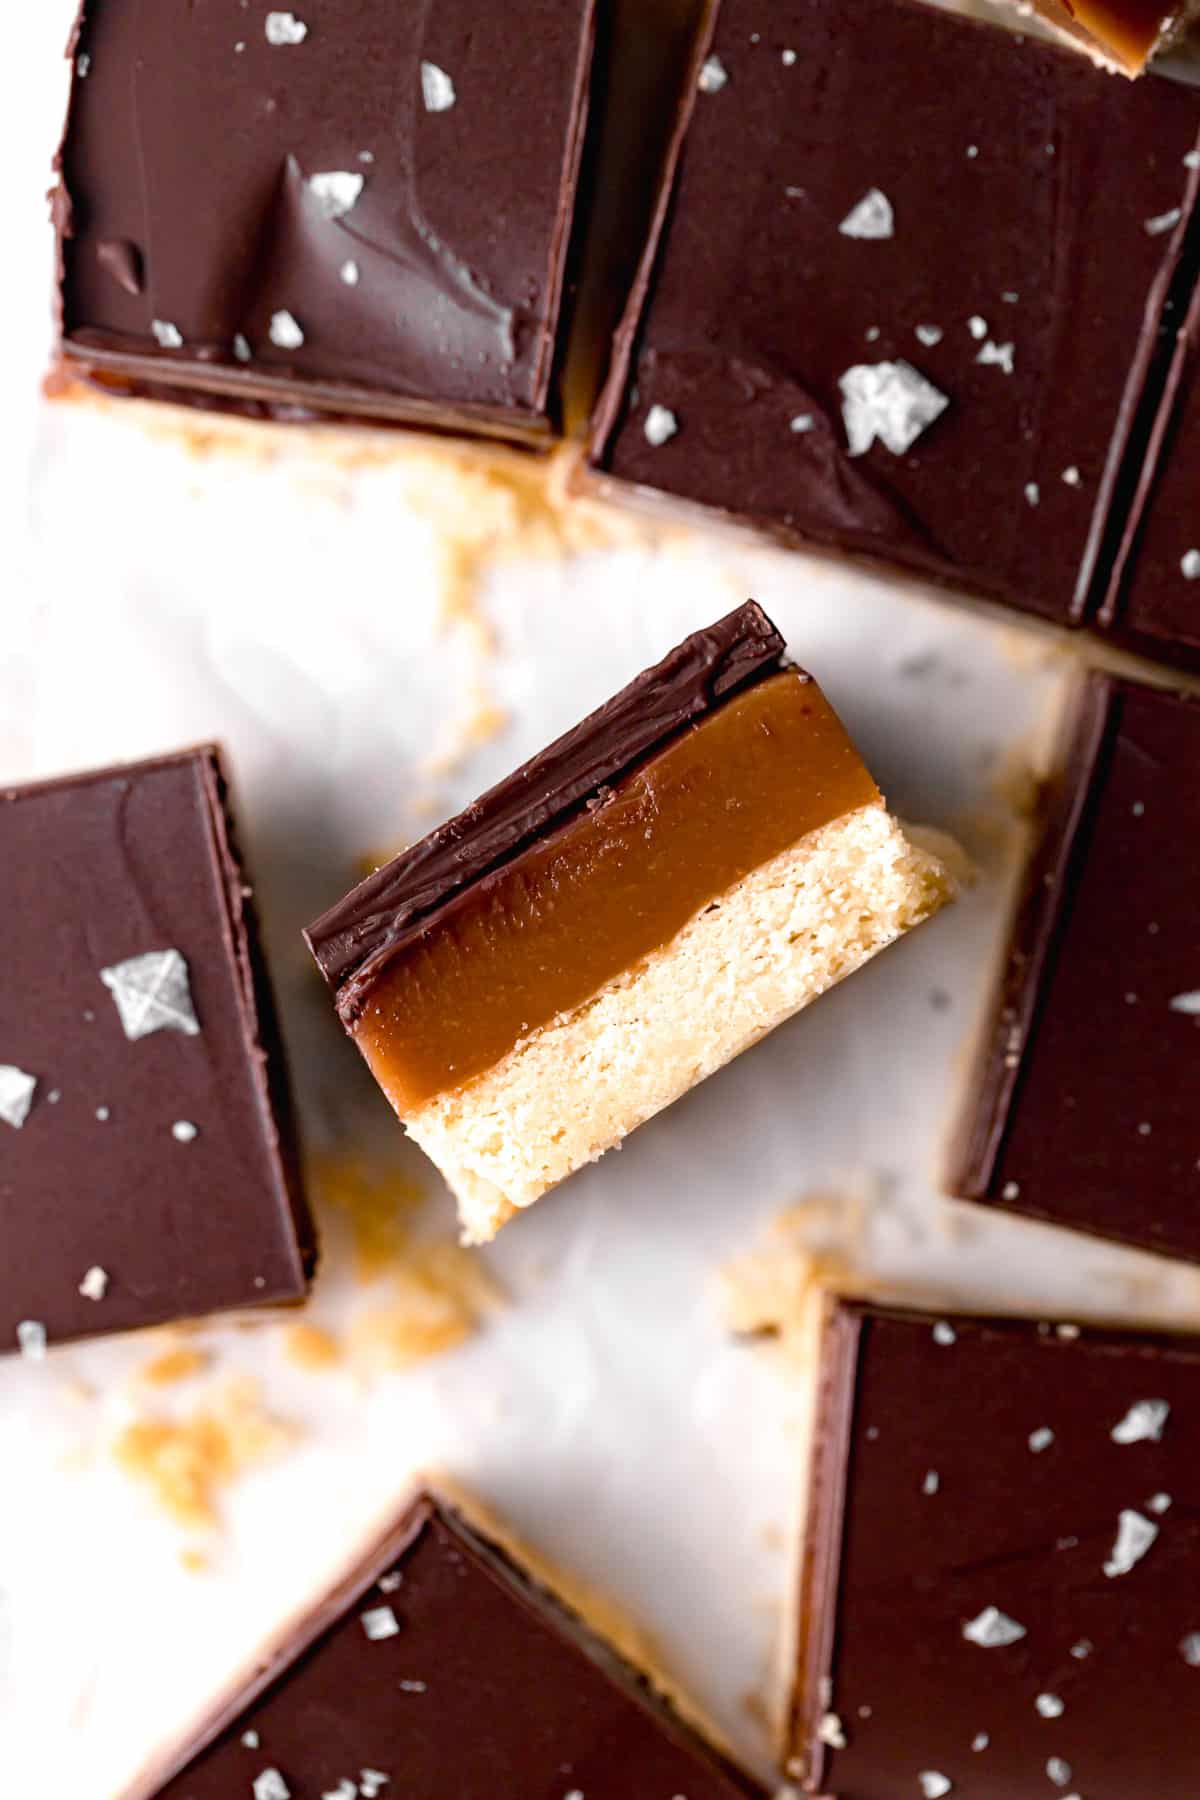 tahini caramel millionaire's shortbread on its side to show layers.